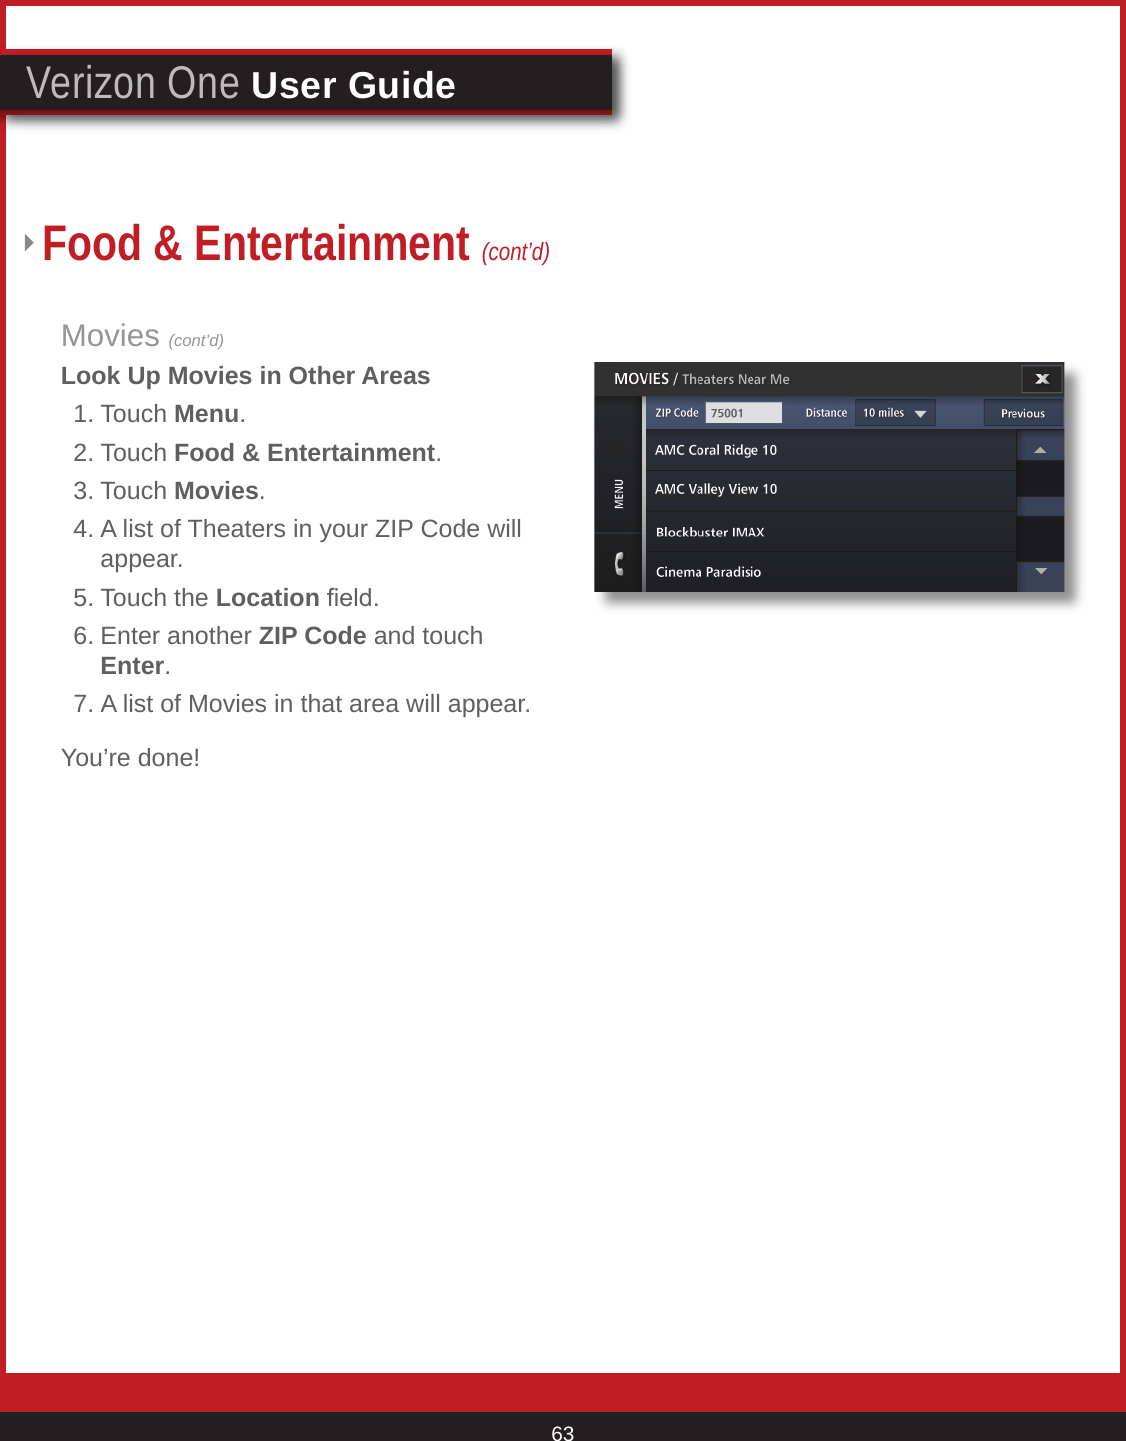 © 2007 Verizon. All Rights Reserved. 63Verizon One User GuideMovies (cont’d)Look Up Movies in Other Areas  1. Touch Menu.  2. Touch Food &amp; Entertainment. 3. Touch Movies.  4. A list of Theaters in your ZIP Code will      appear.  5. Touch the Location eld.  6. Enter another ZIP Code and touch       Enter.  7. A list of Movies in that area will appear.You’re done!Food &amp; Entertainment (cont’d)